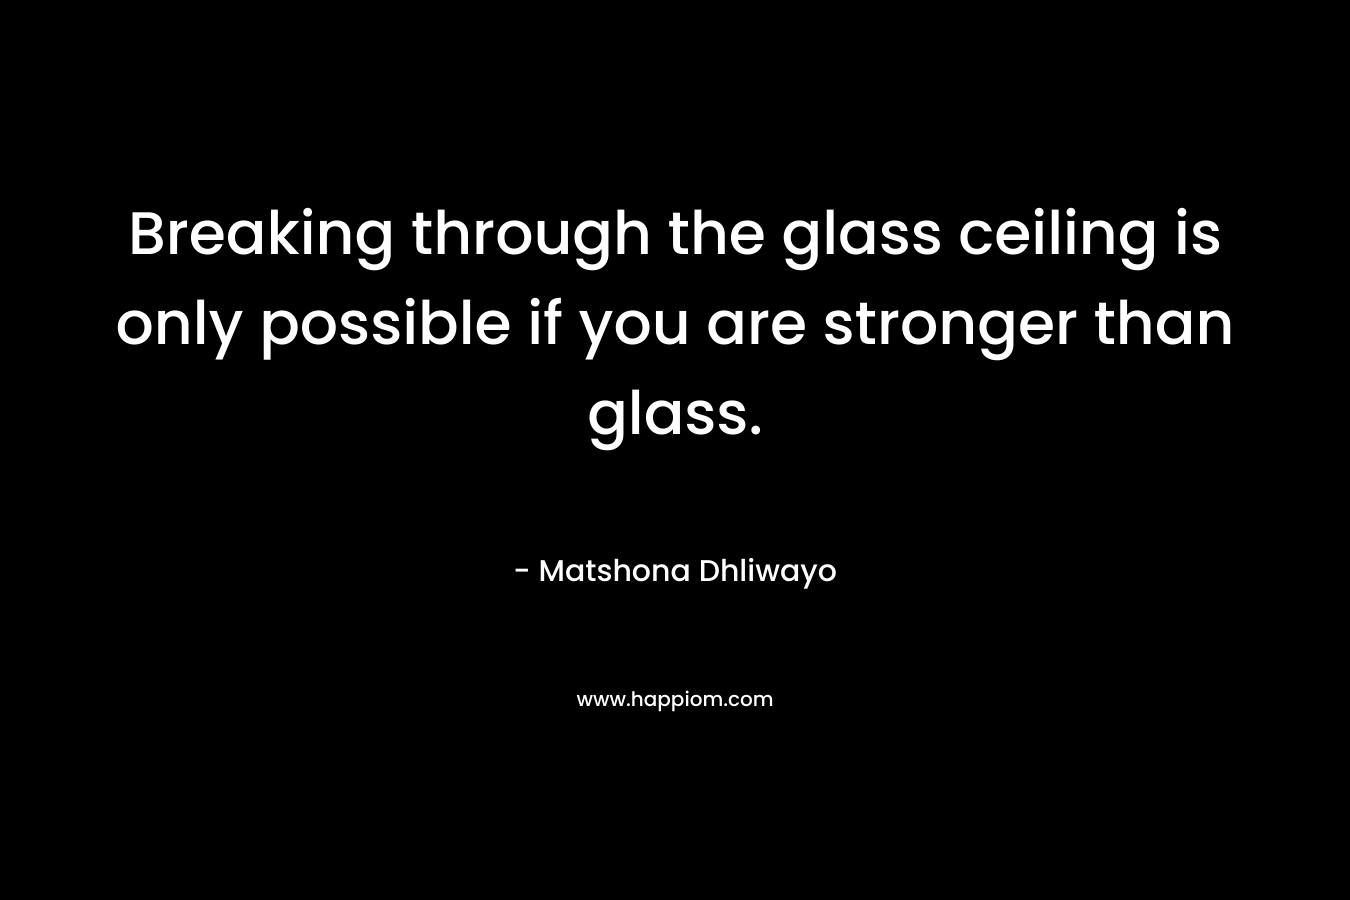 Breaking through the glass ceiling is only possible if you are stronger than glass. – Matshona Dhliwayo